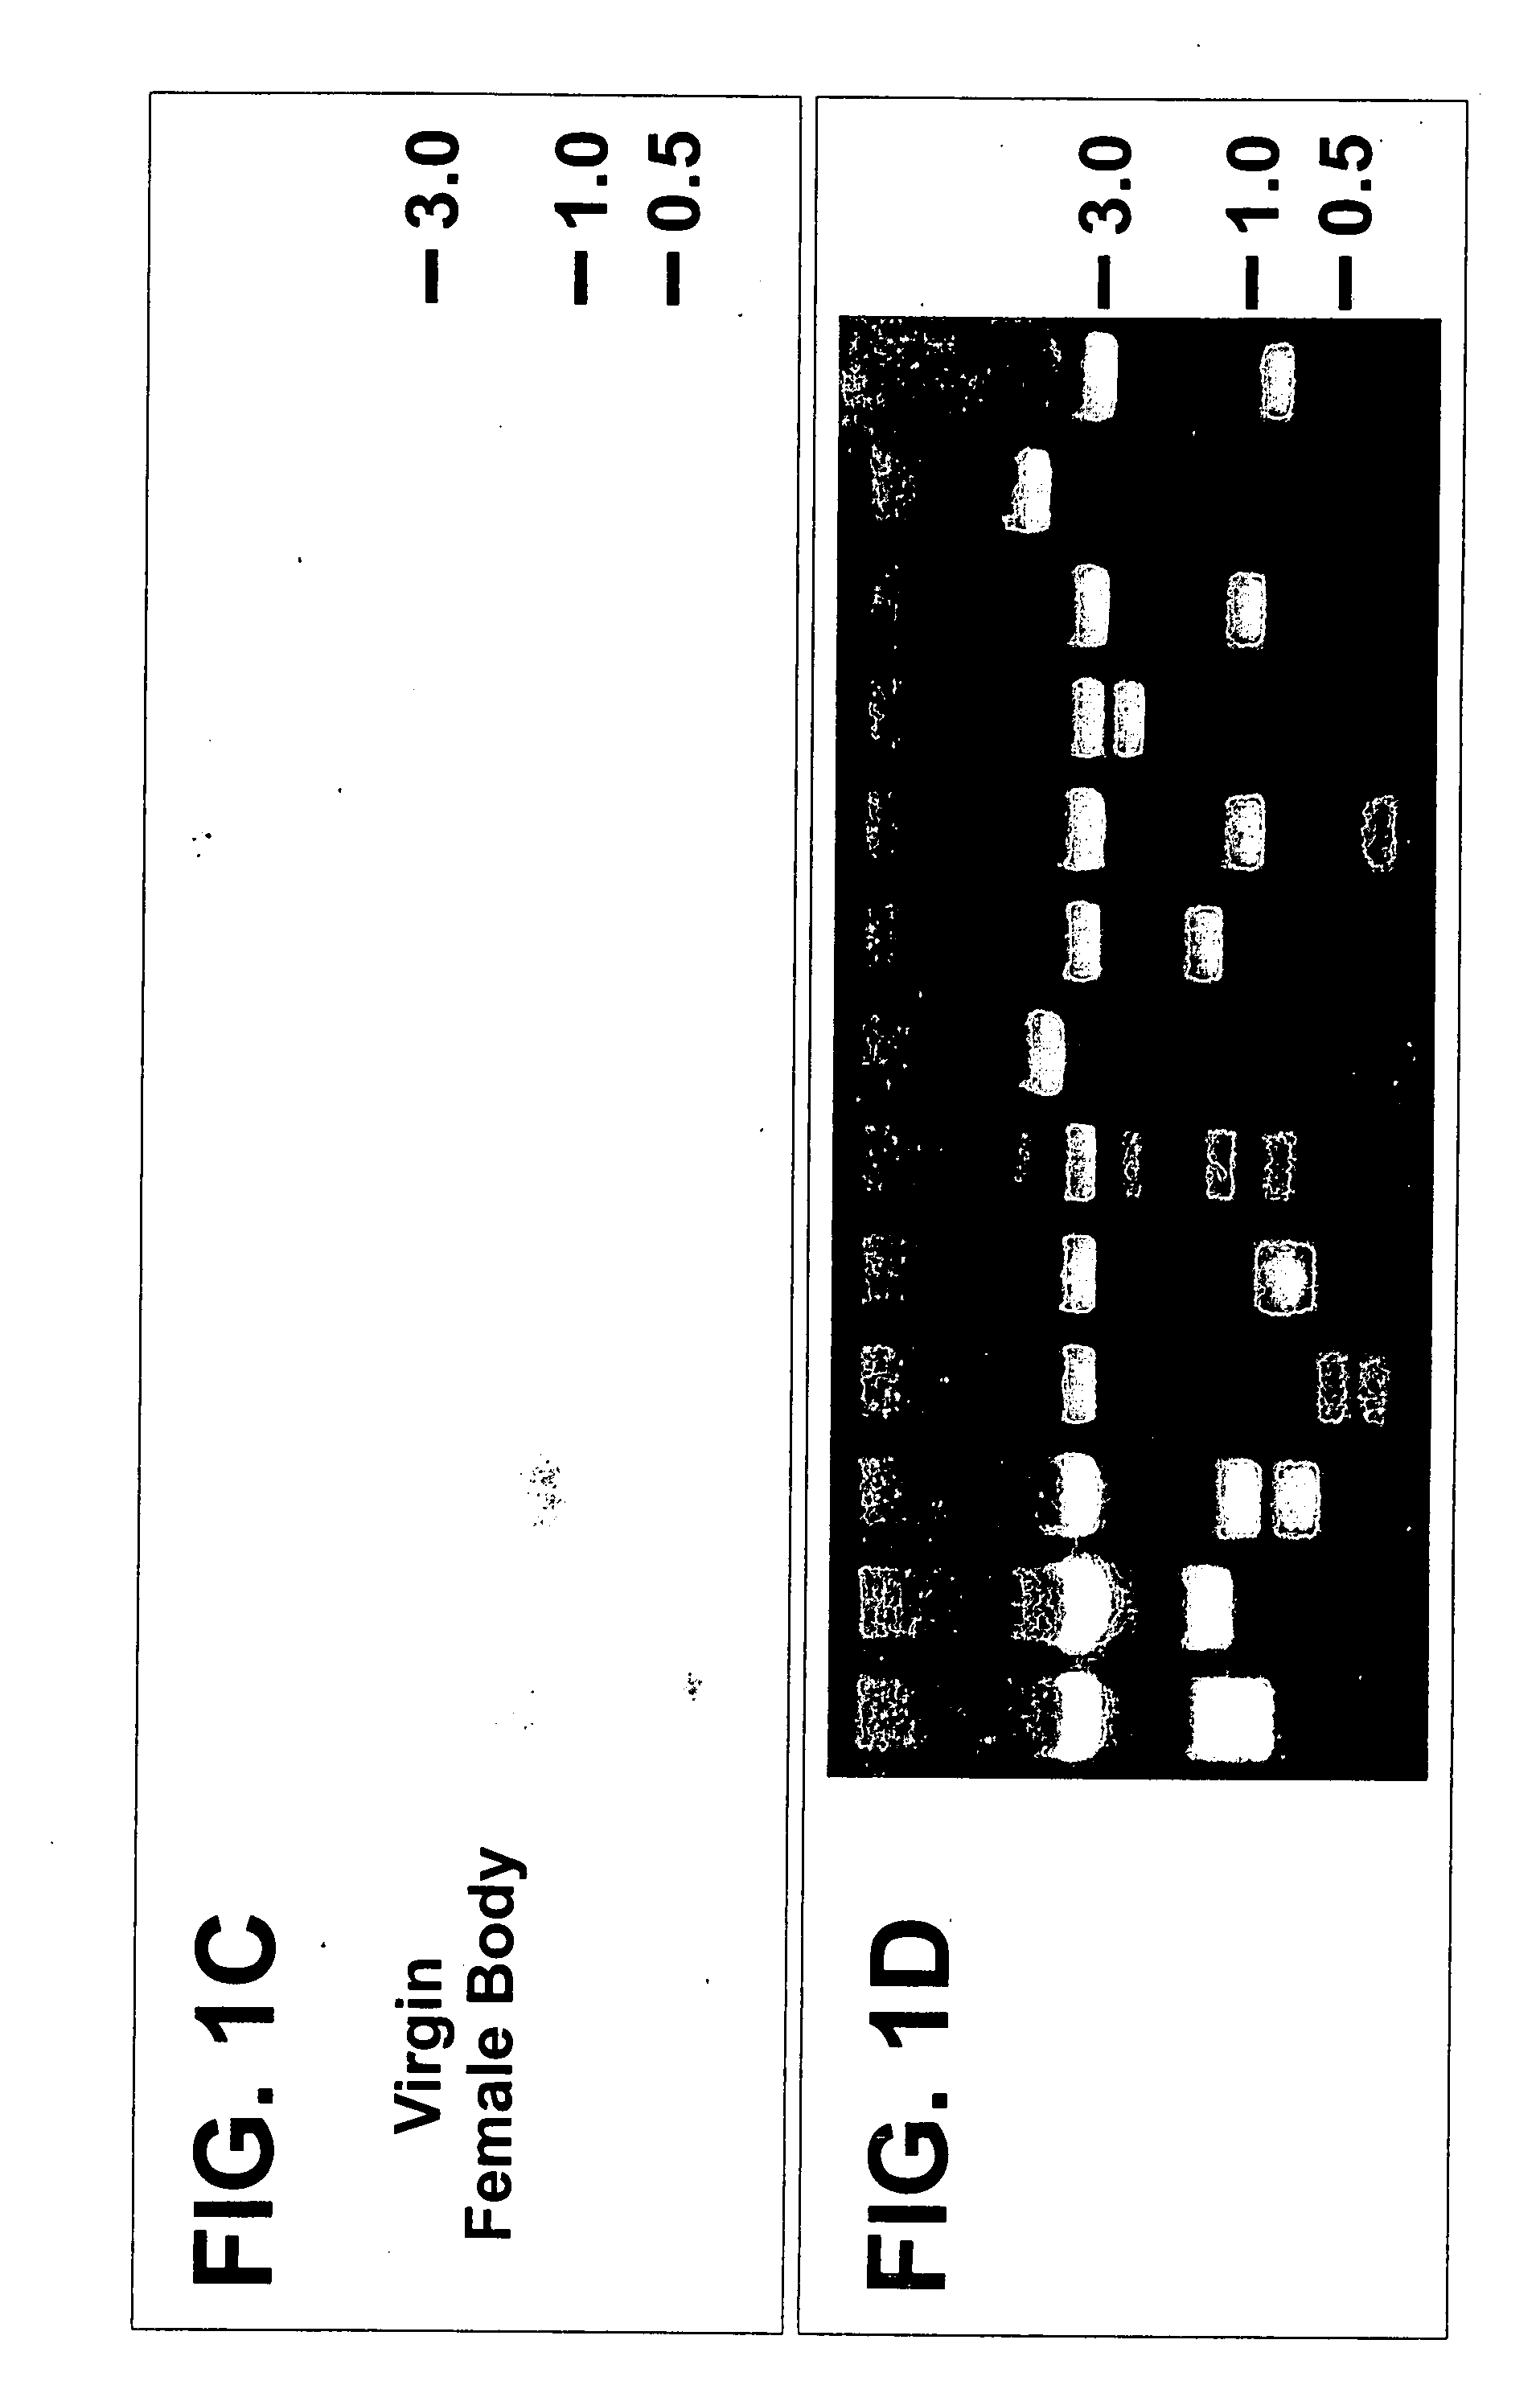 Genes encoding insect odorant receptors and uses thereof